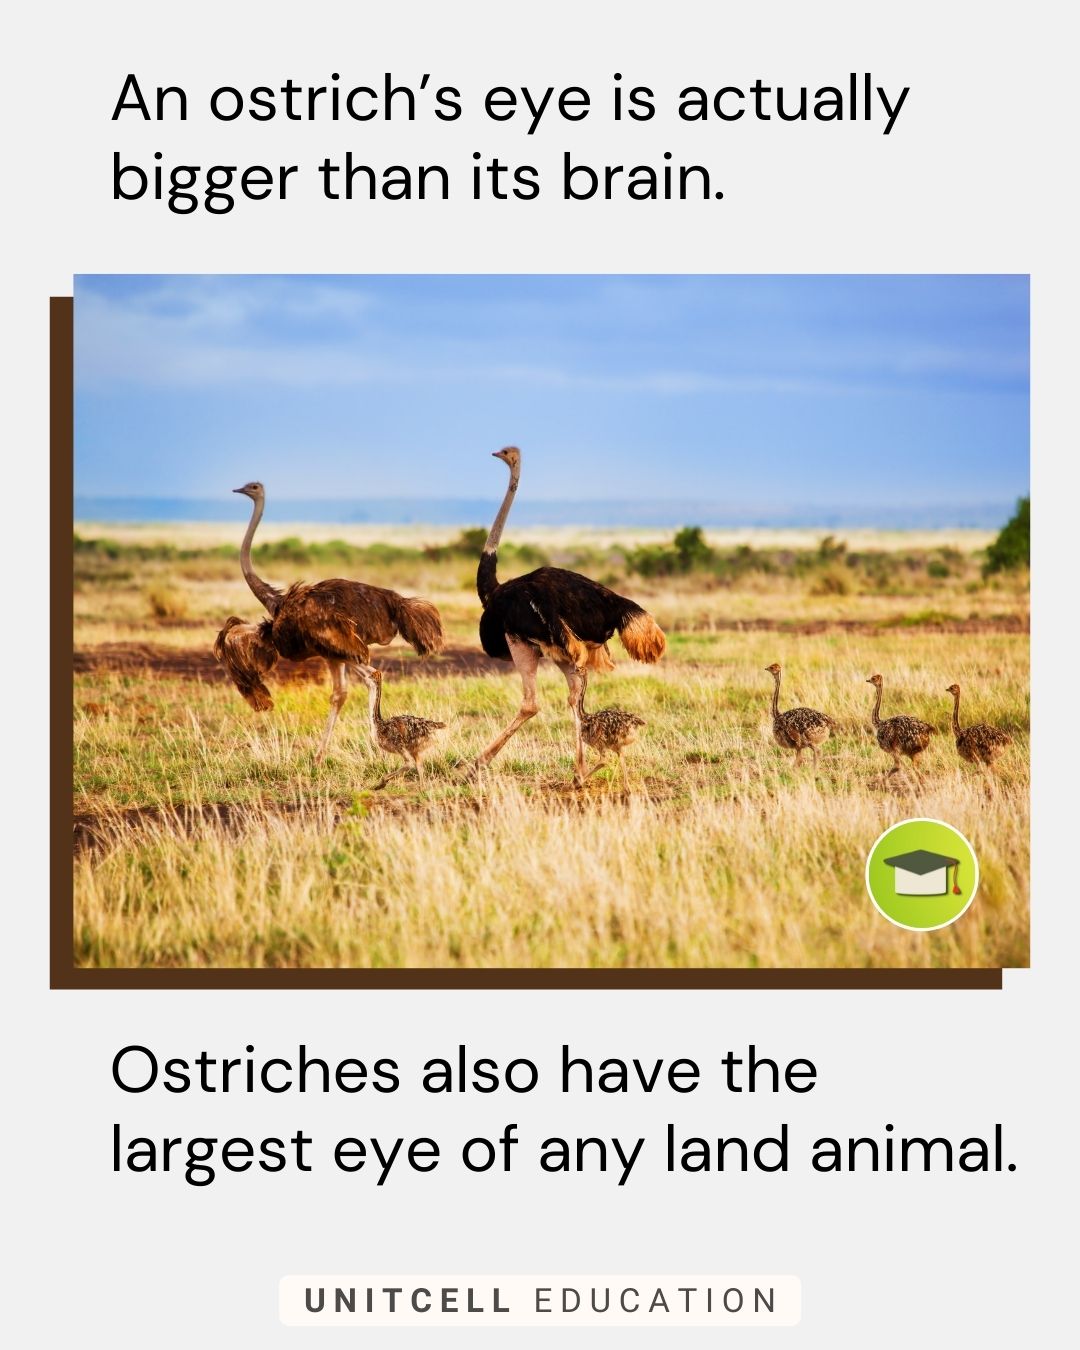 An ostrich’s eye is actually bigger than its brain. Ostriches also have the largest eye of any land animal.